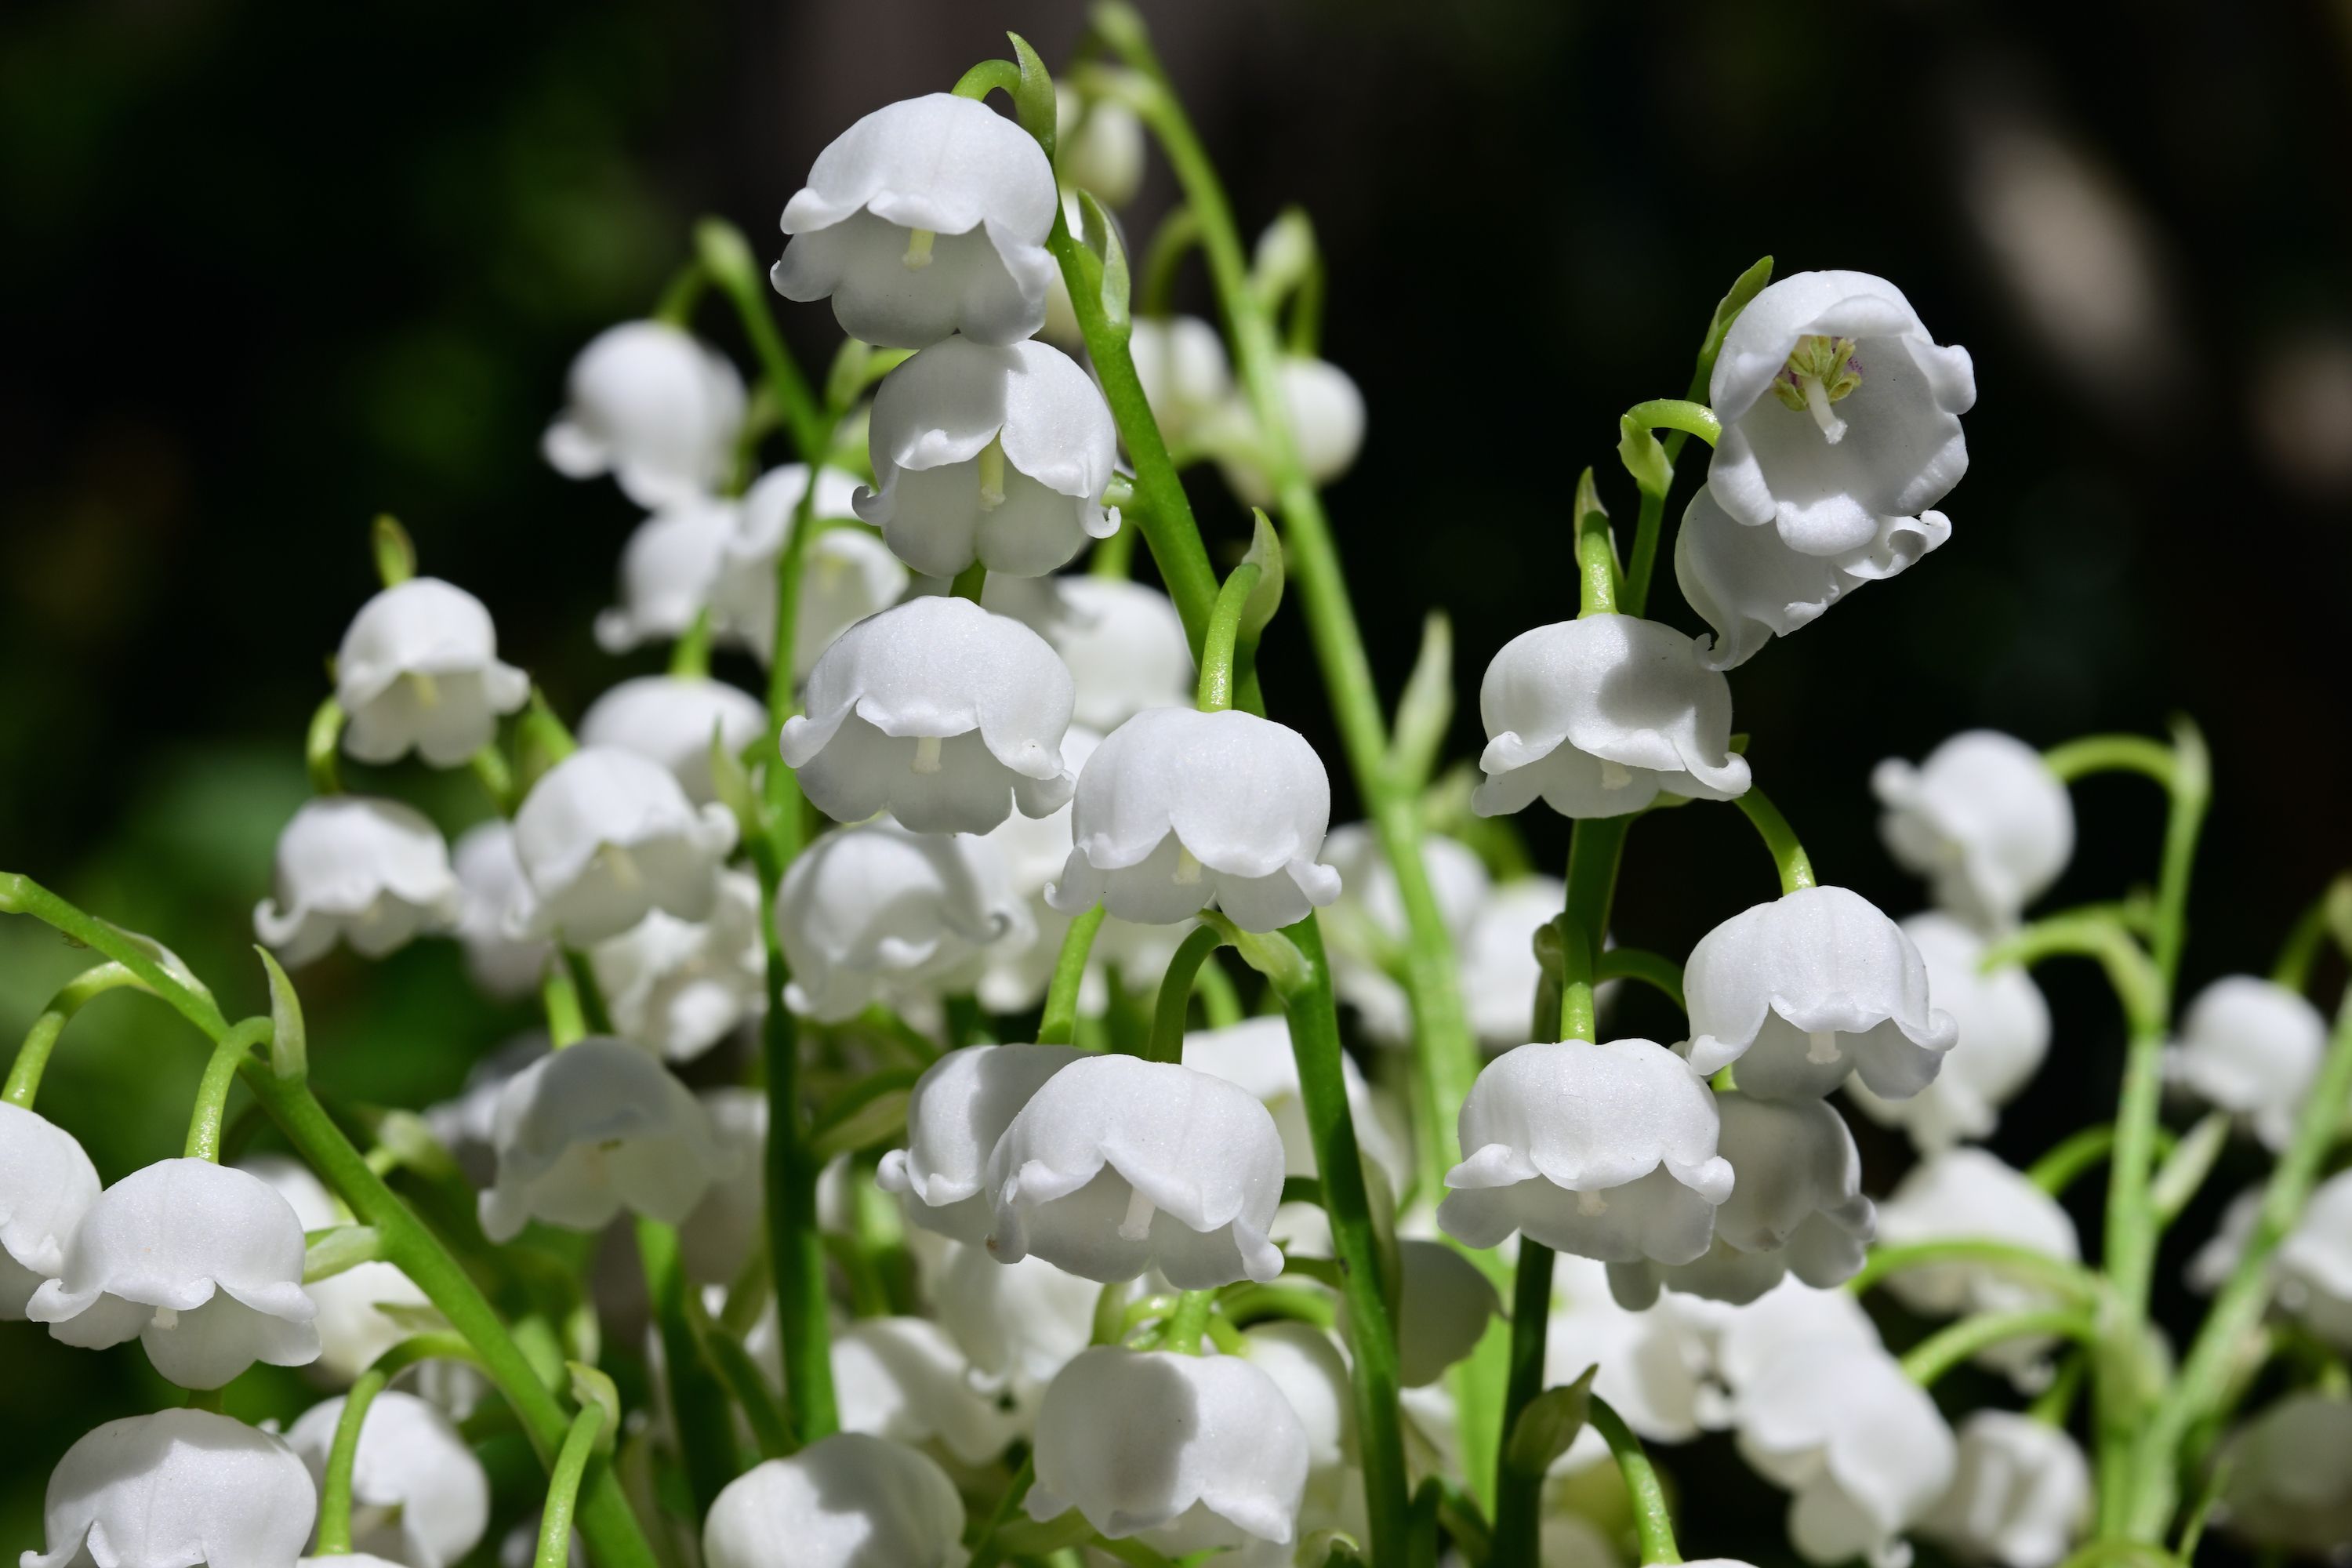 Lily Of The Valley Division - How To Divide A Lily Of The Valley